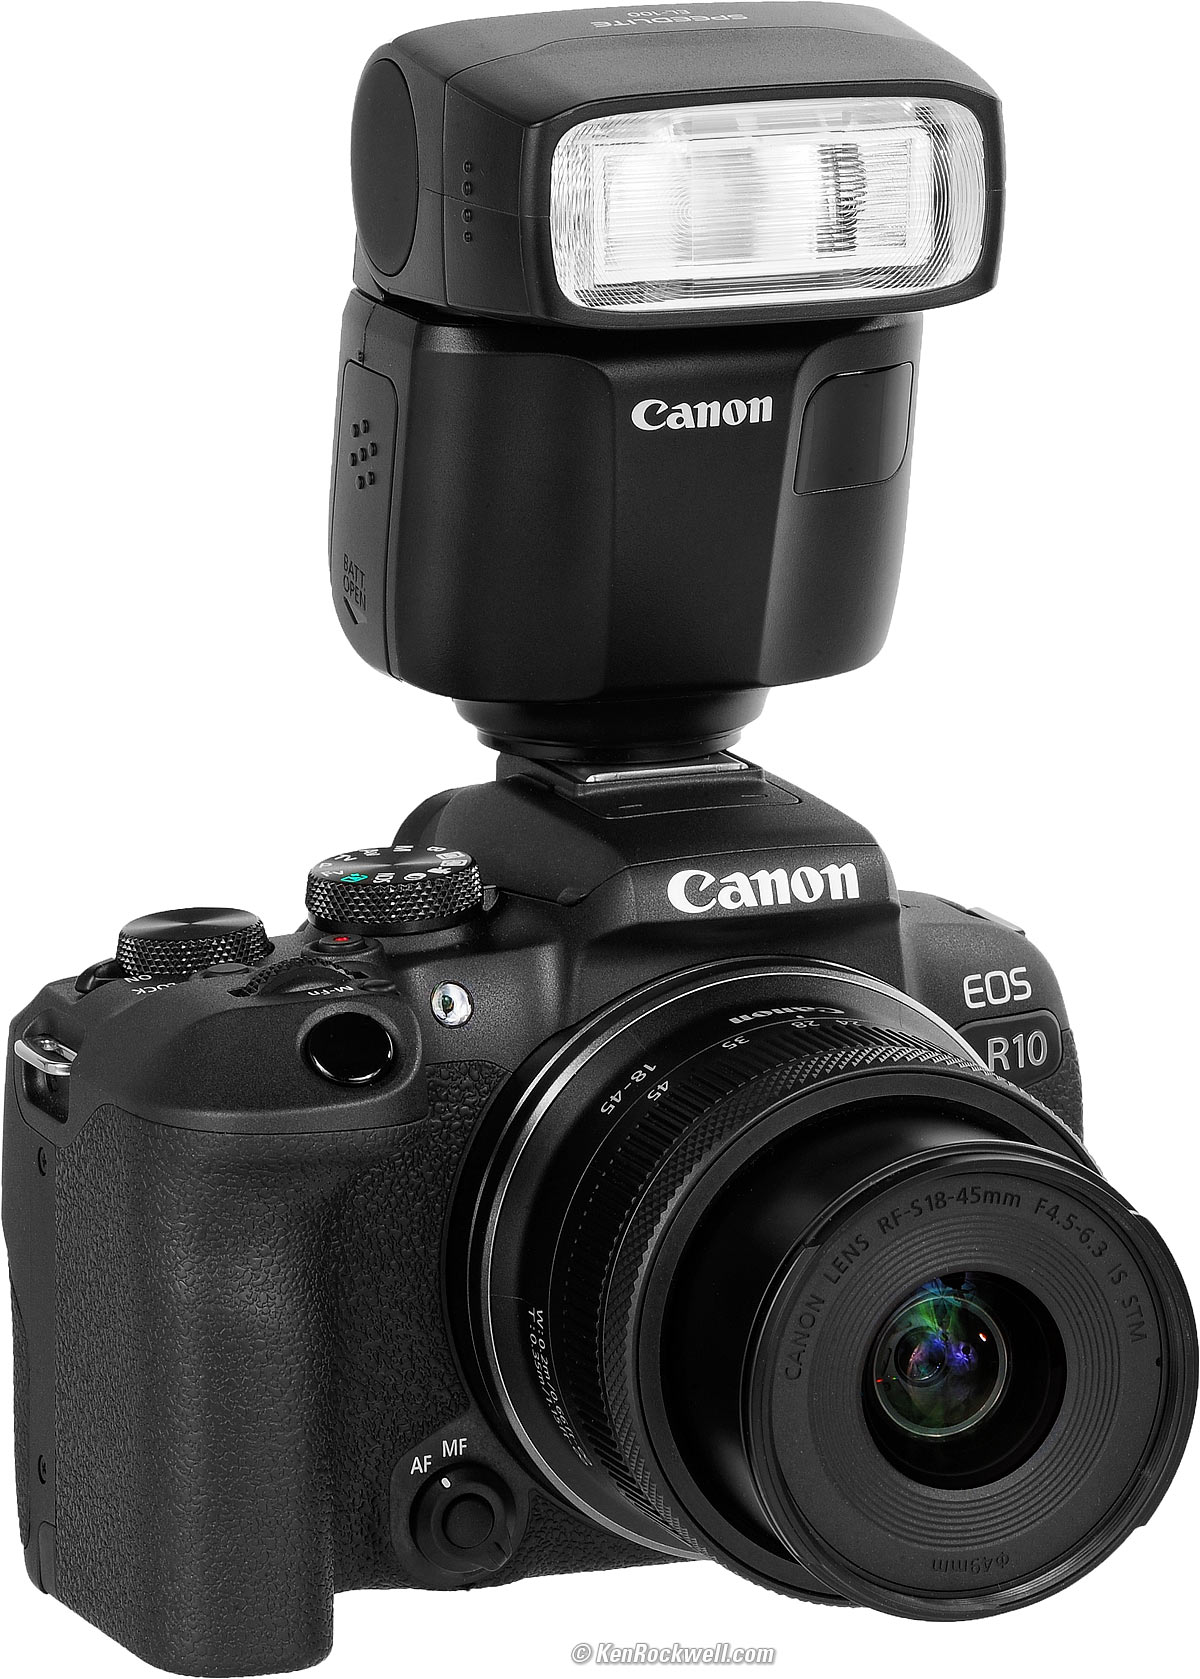 Canon EL-100 Flash Review by Ken Rockwell